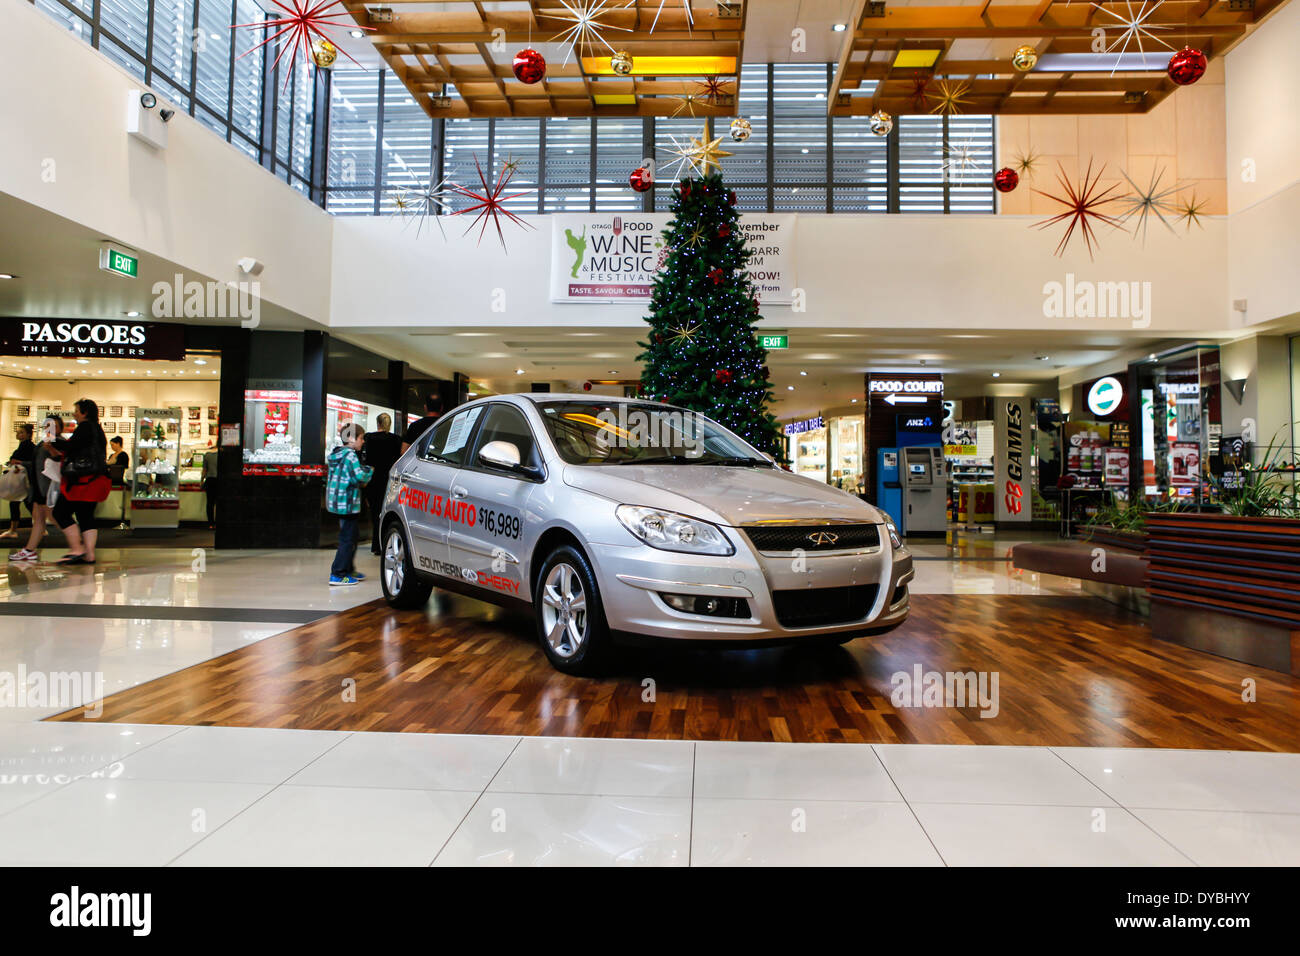 Chinese car in New Zealand shopping mall Stock Photo